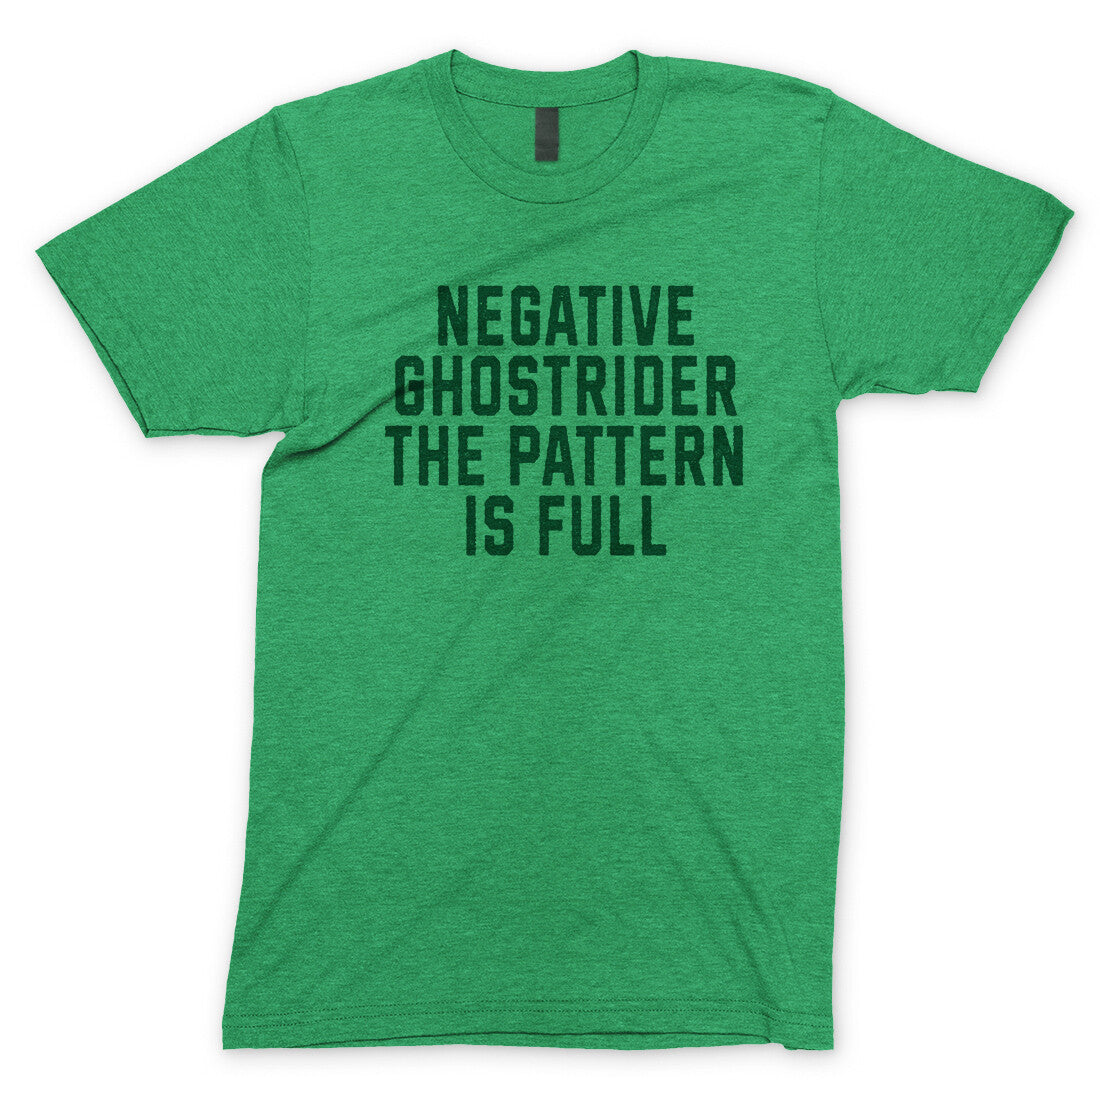 Negative Ghostrider the Pattern is Full in Heather Irish Green Color